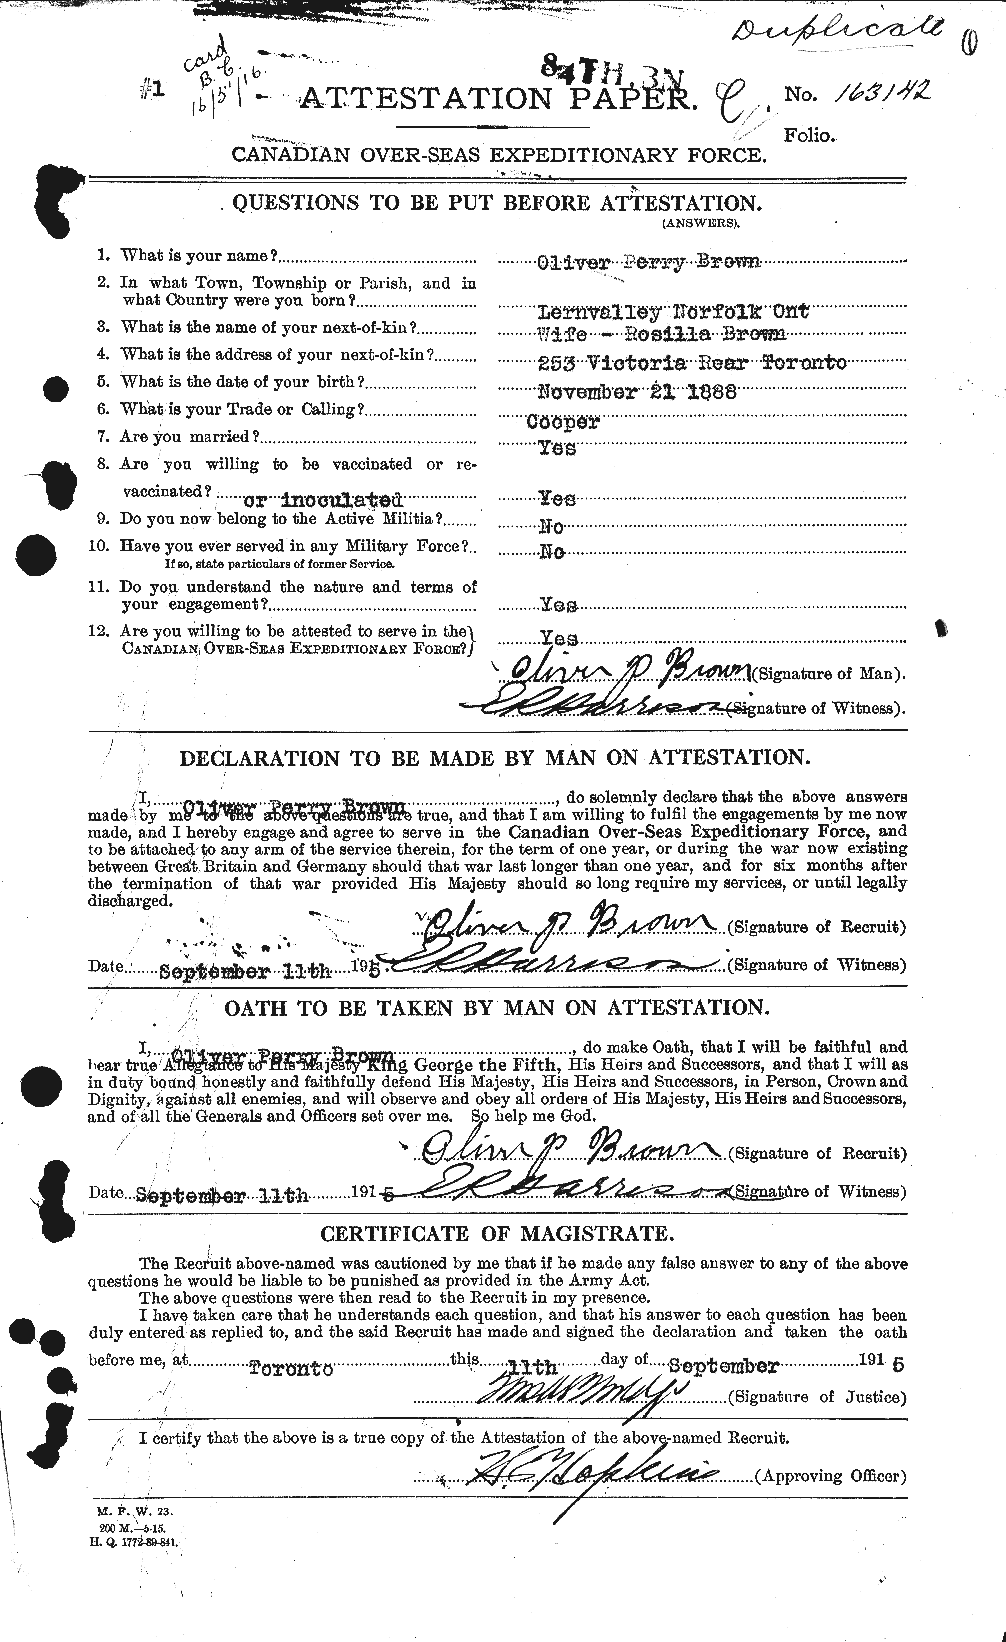 Personnel Records of the First World War - CEF 267129a